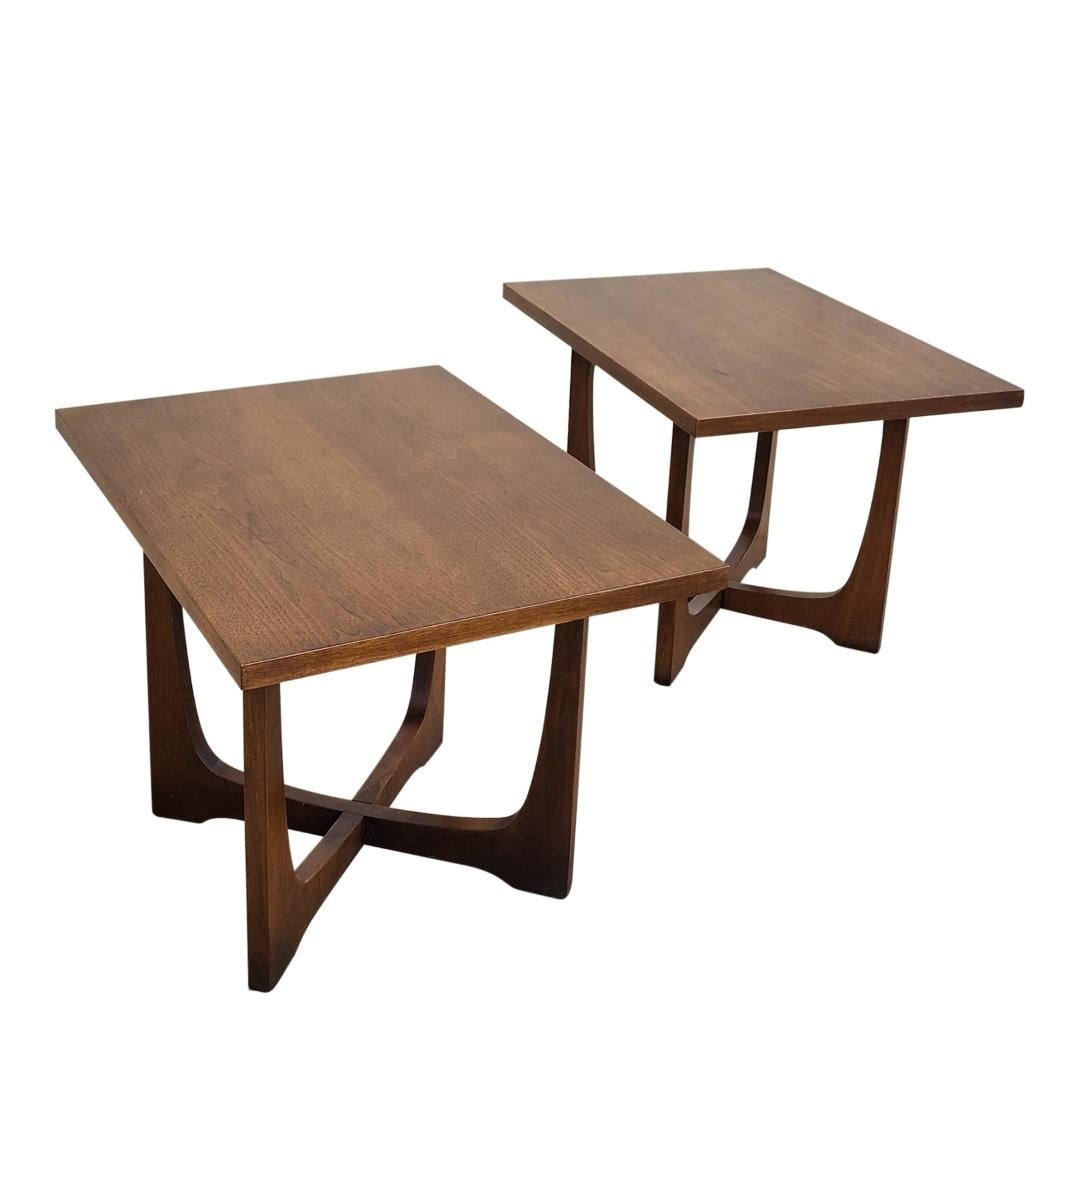 These Broyhill Emphasis walnut end tables are a classic example of mid-century modern. They feature the iconic sculpted base. These pieces would look fantastic in any living or entertainment room!